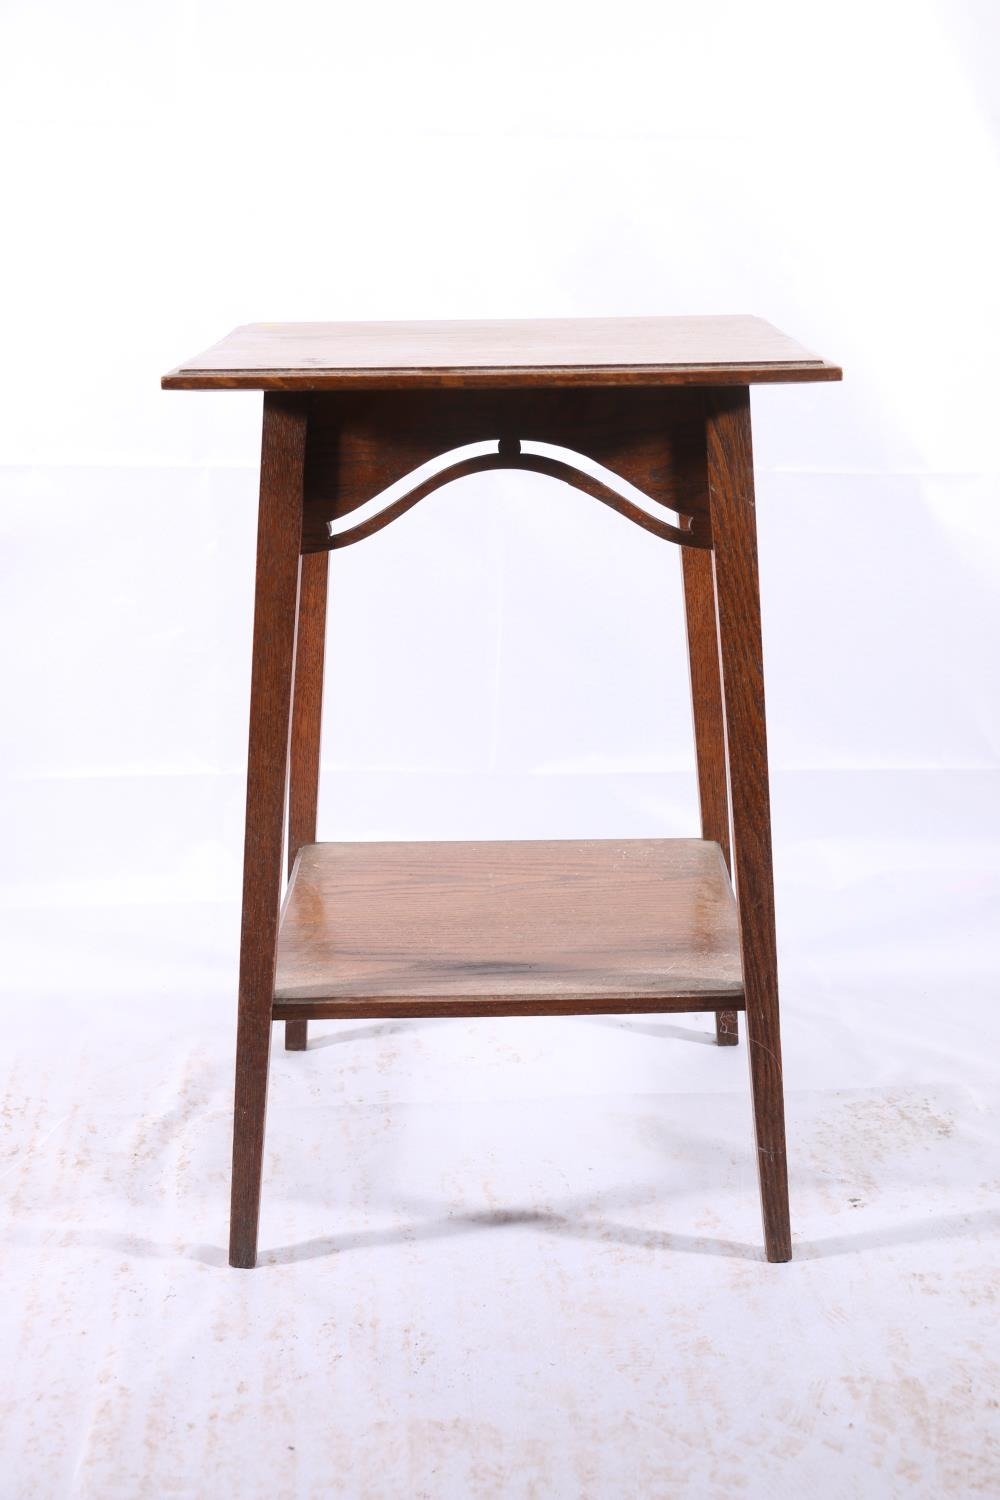 Arts & Crafts style oak occasional table, c1900, in the manner of Liberty and Co., of square top